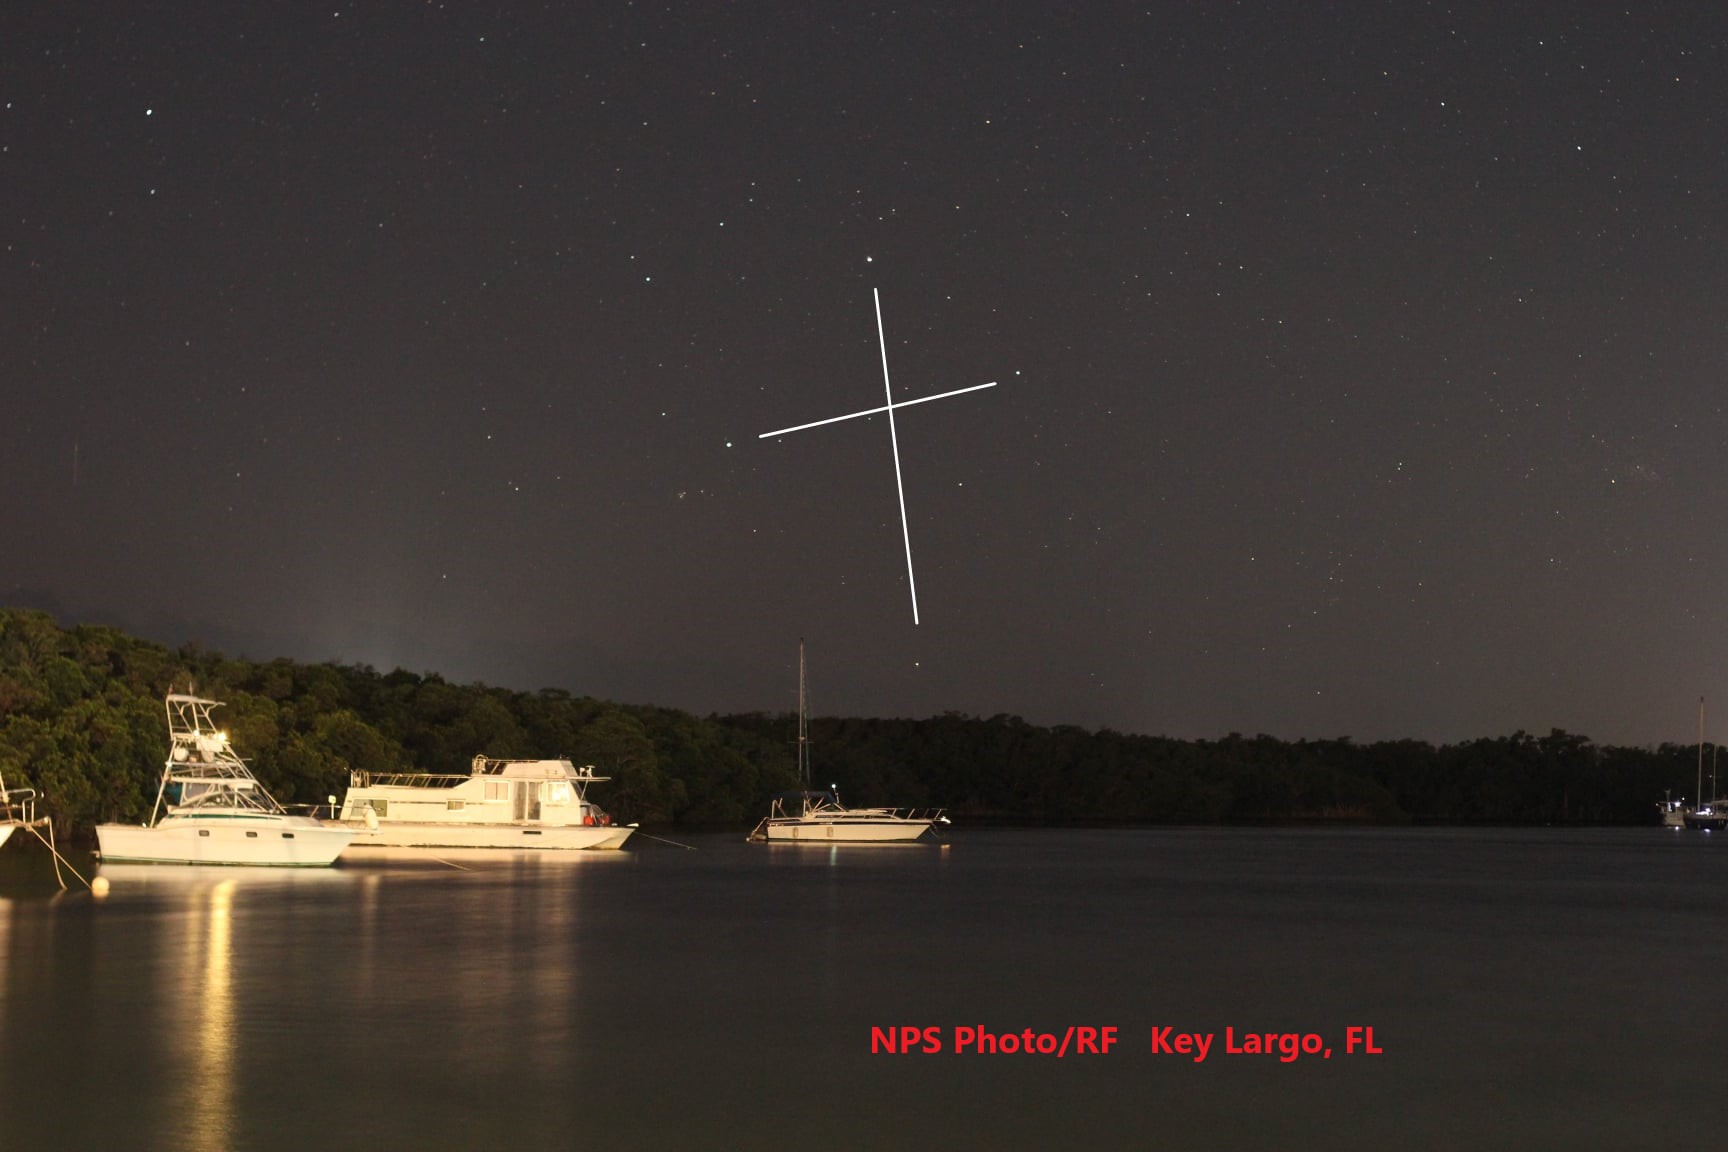 A picture containing a lake, boats in the water, trees, and stars in the form of a cross.